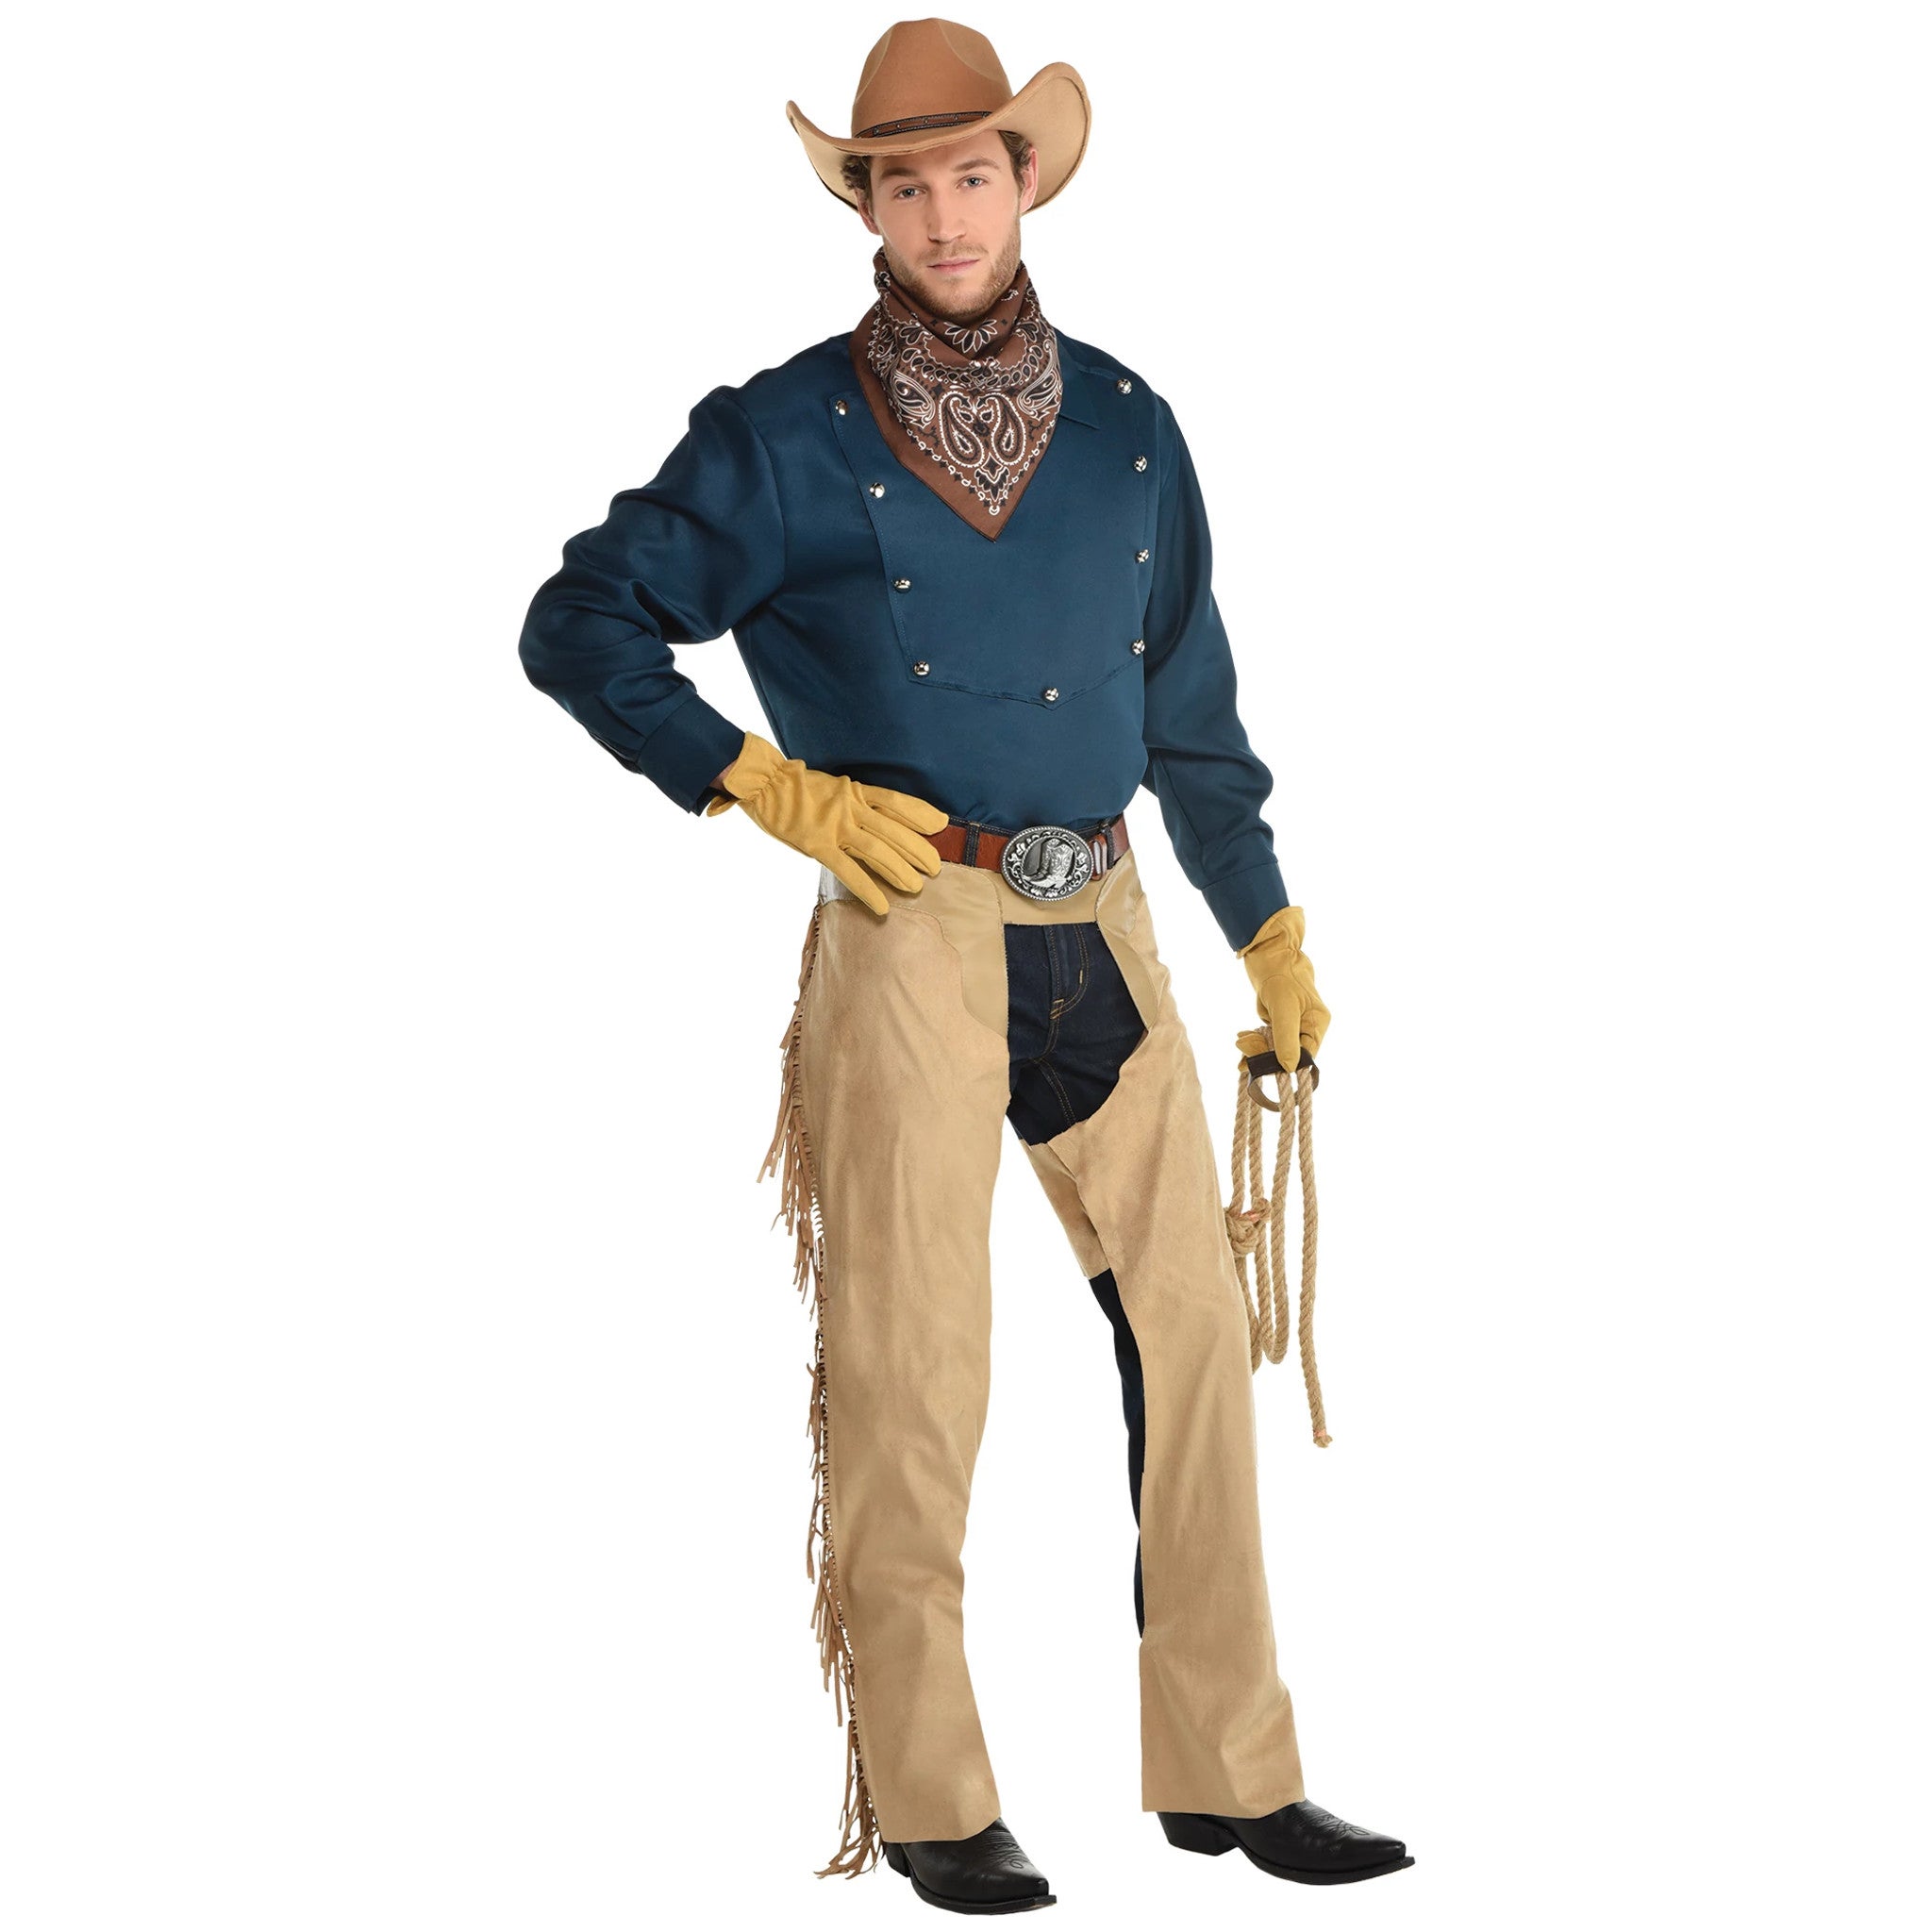 A cowboy with a hat, chaps, and other accessories